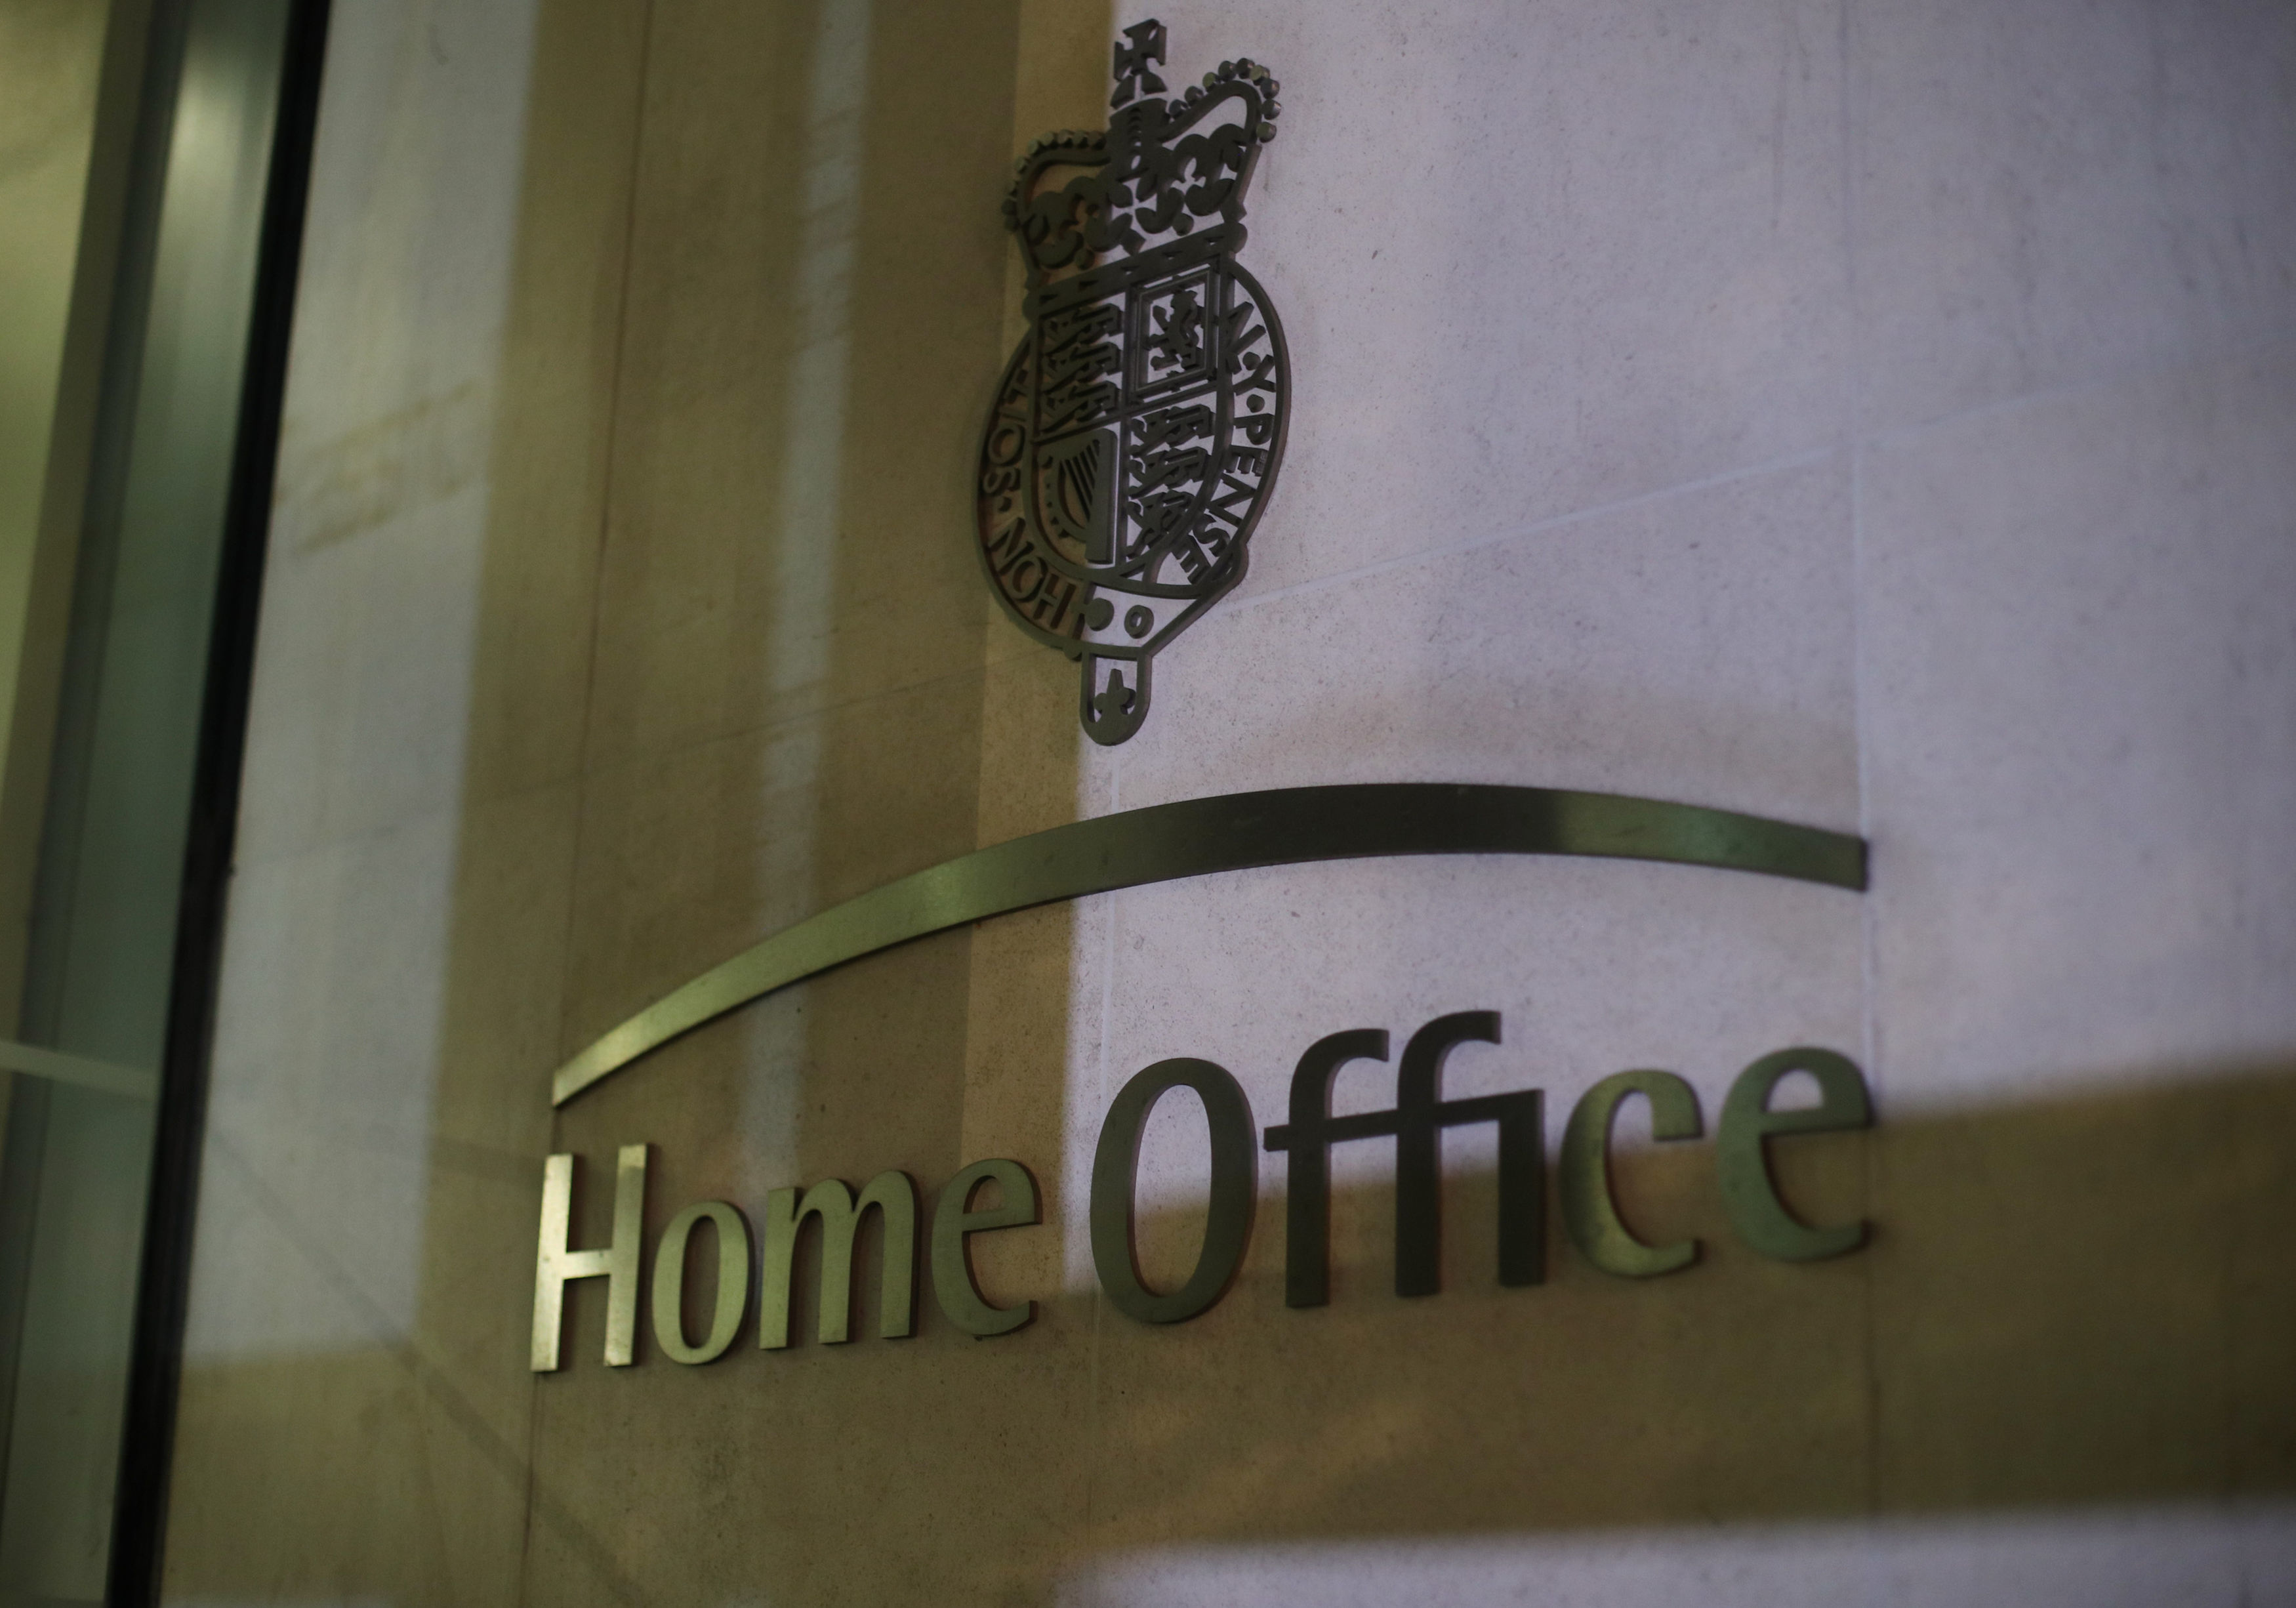 'Illiterate' Home Office quotes Jesus in asylum rejection letter